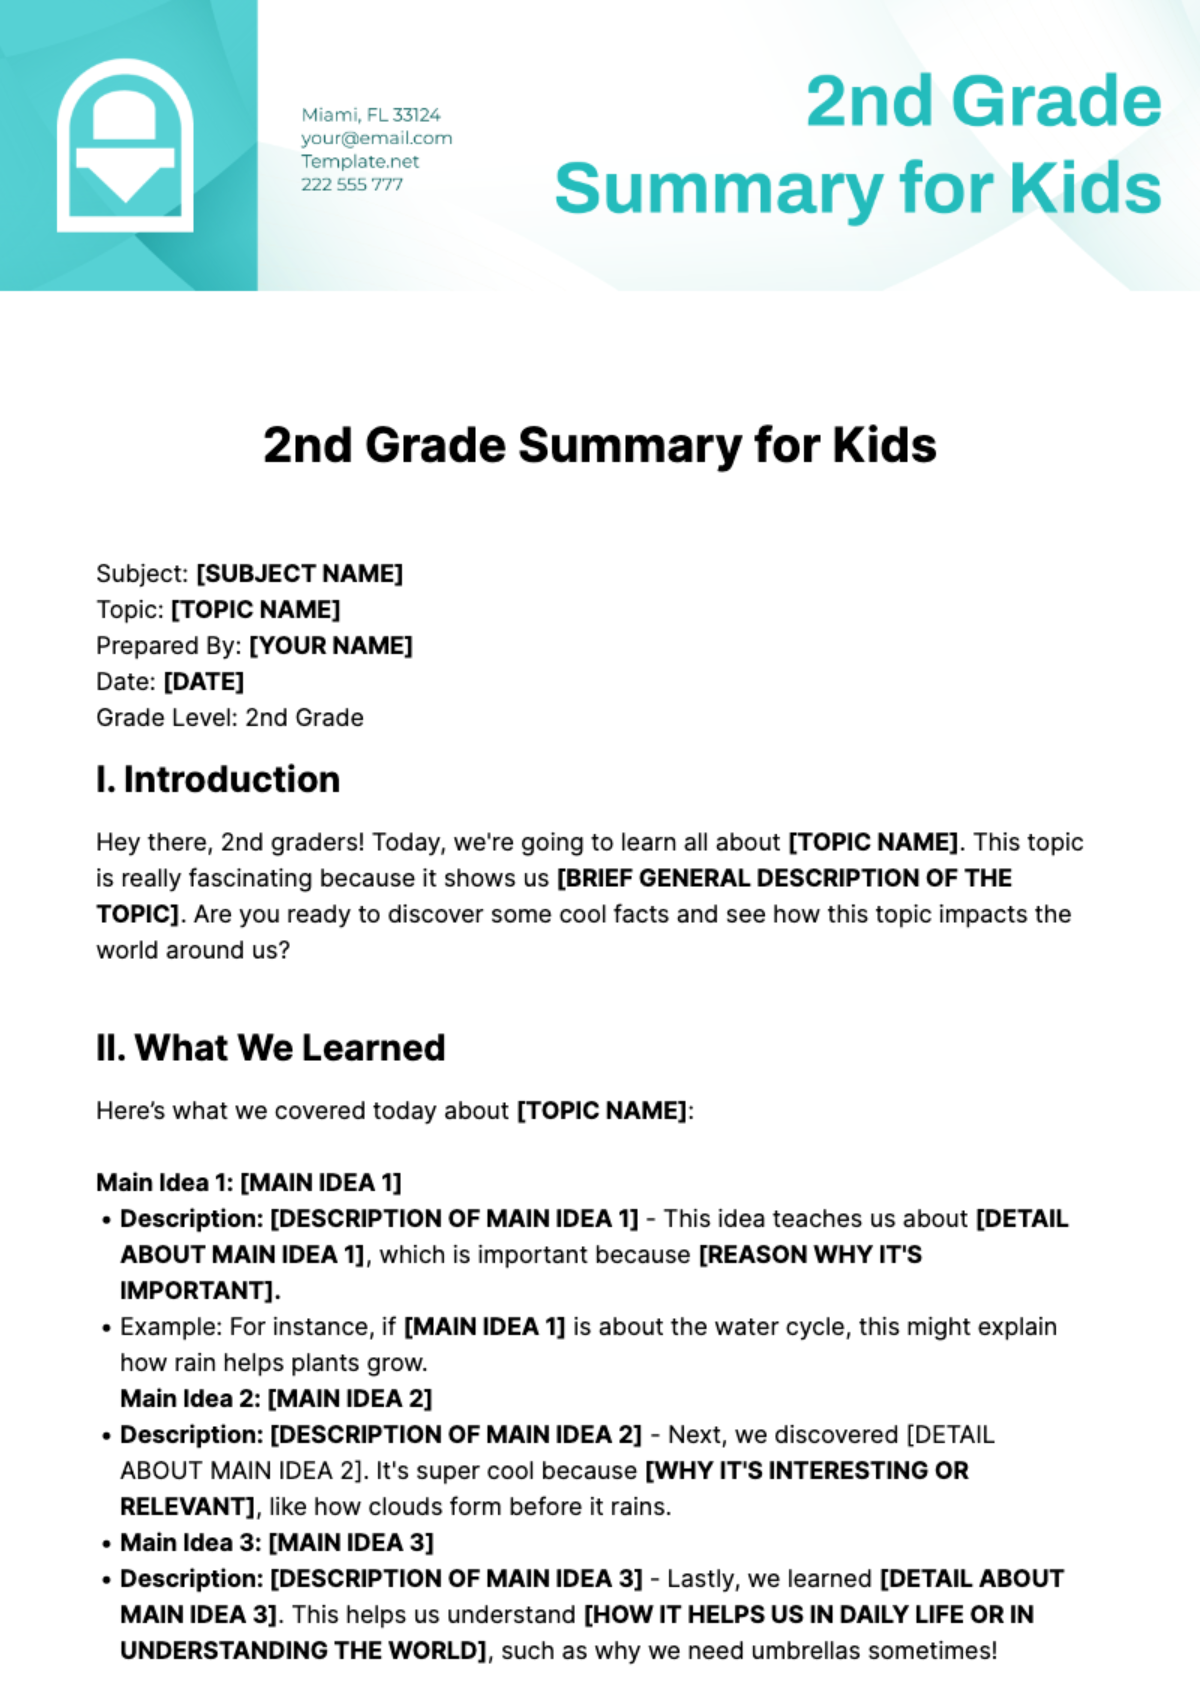 2nd Grade Summary for Kids Template